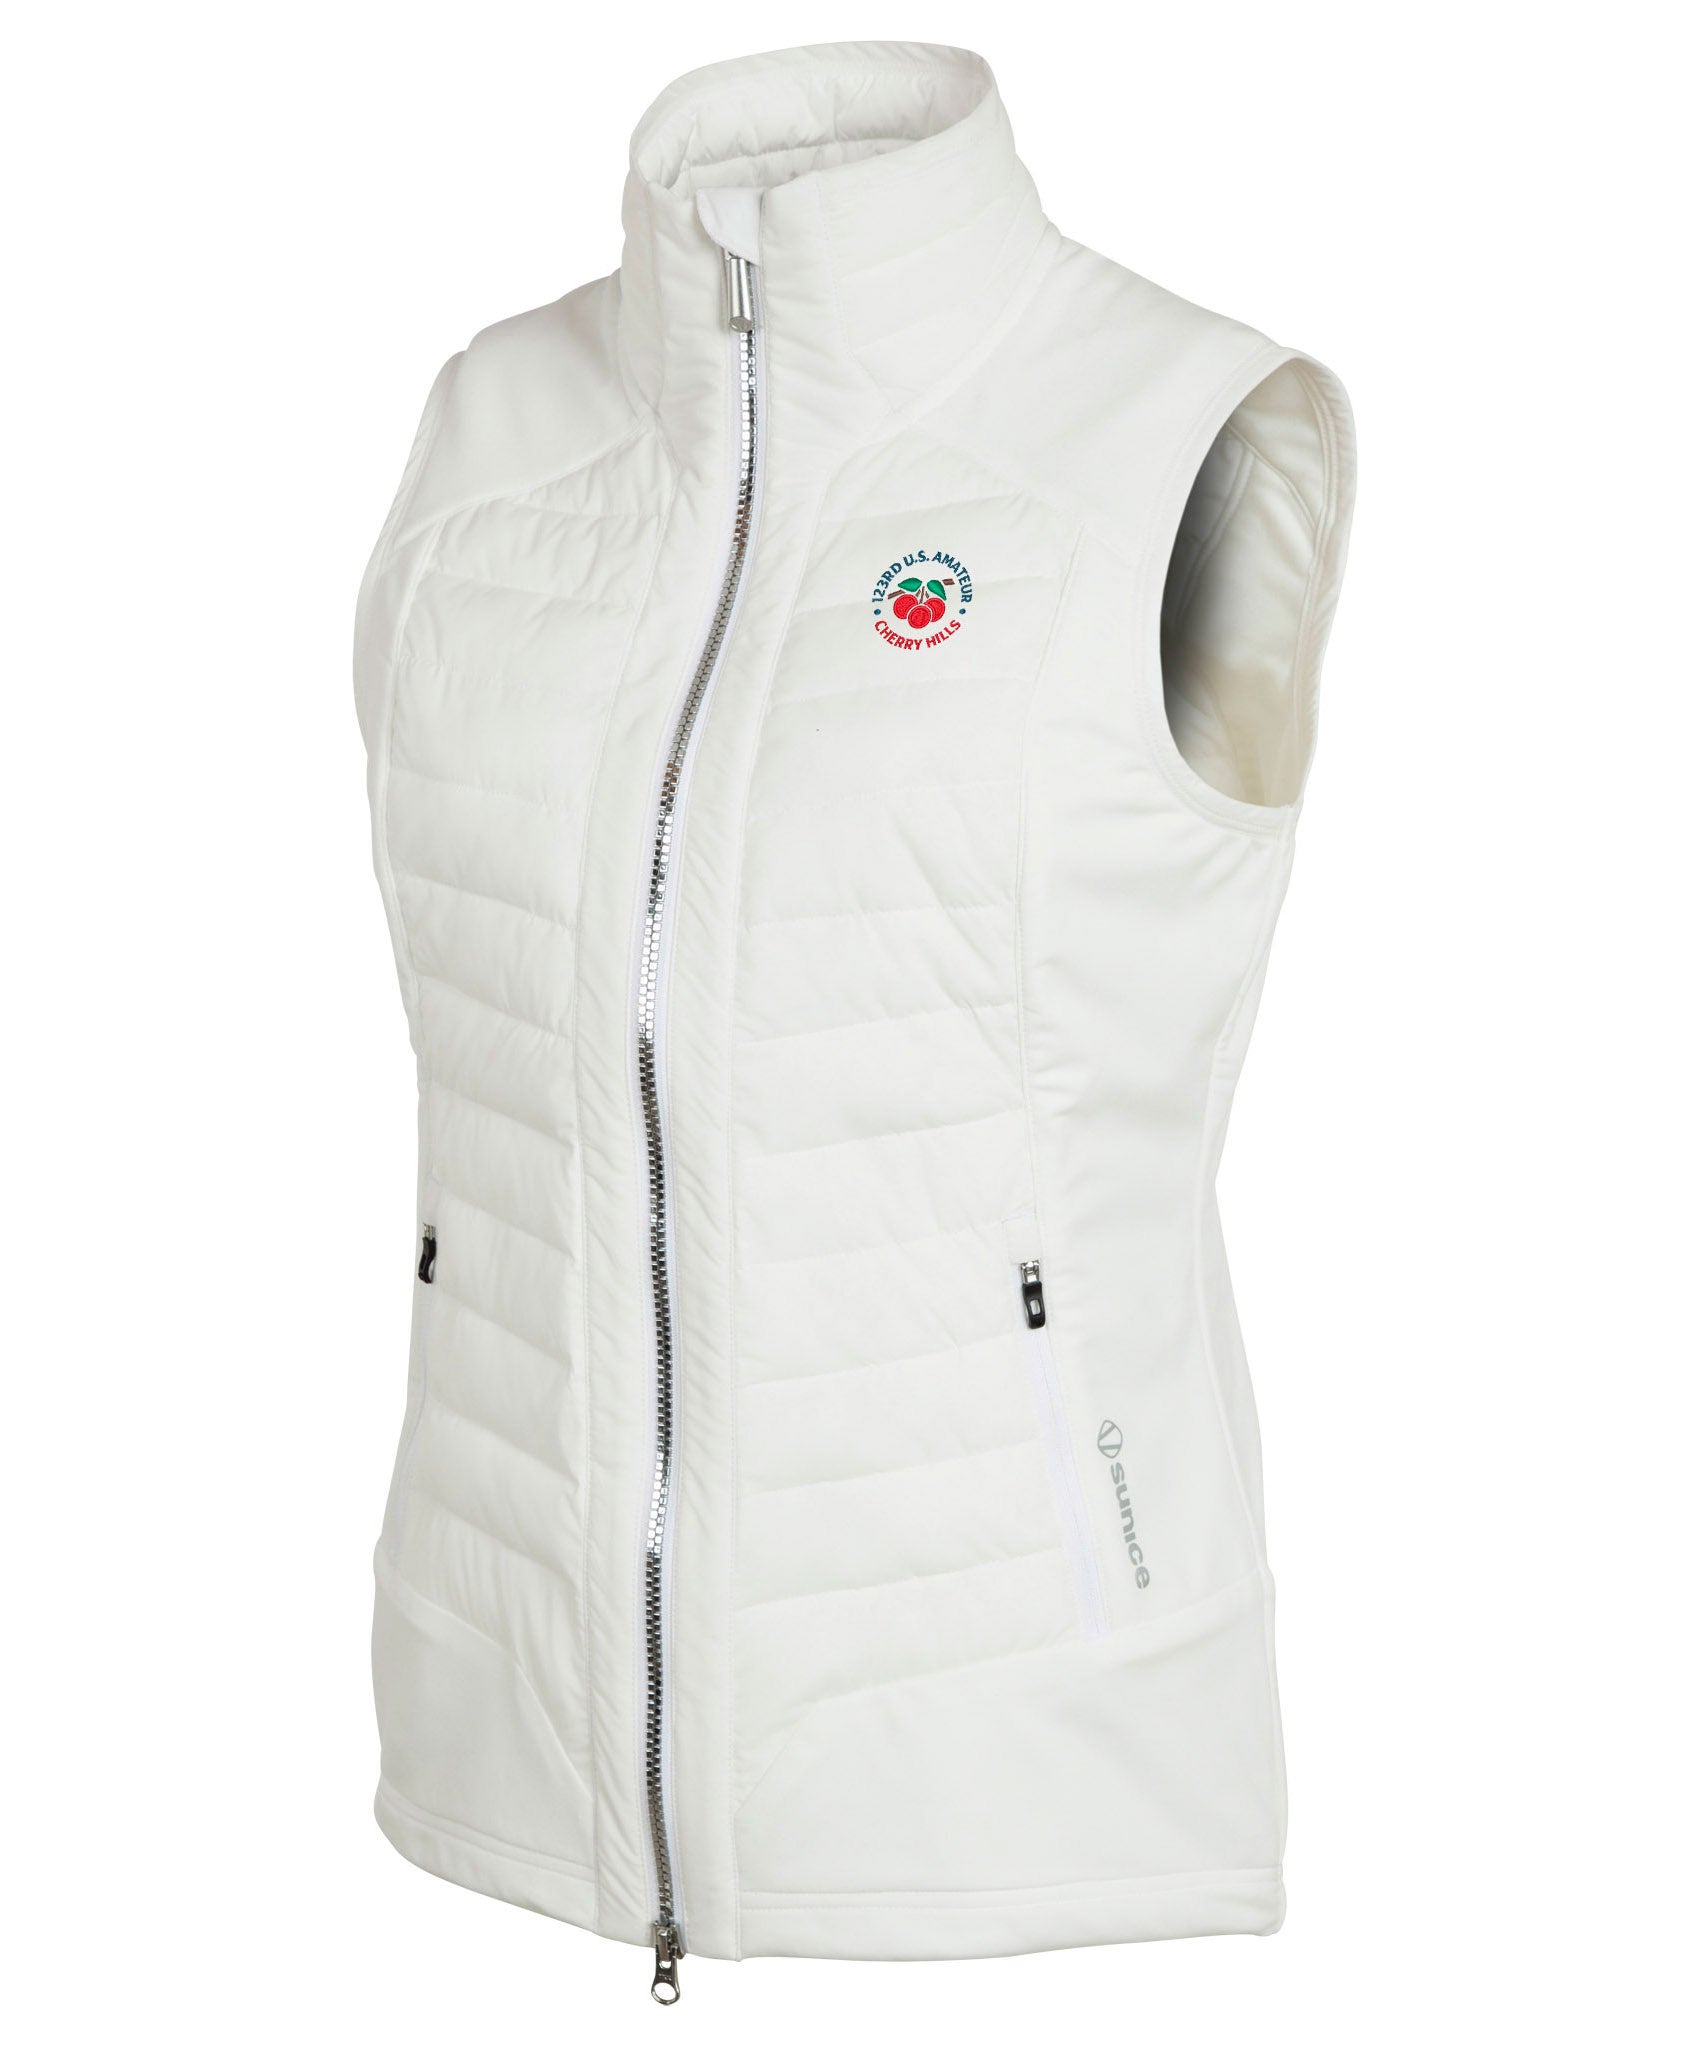 123rd U.S. Amateur Sunice Women's Lizzie Quilted Thermal Vest